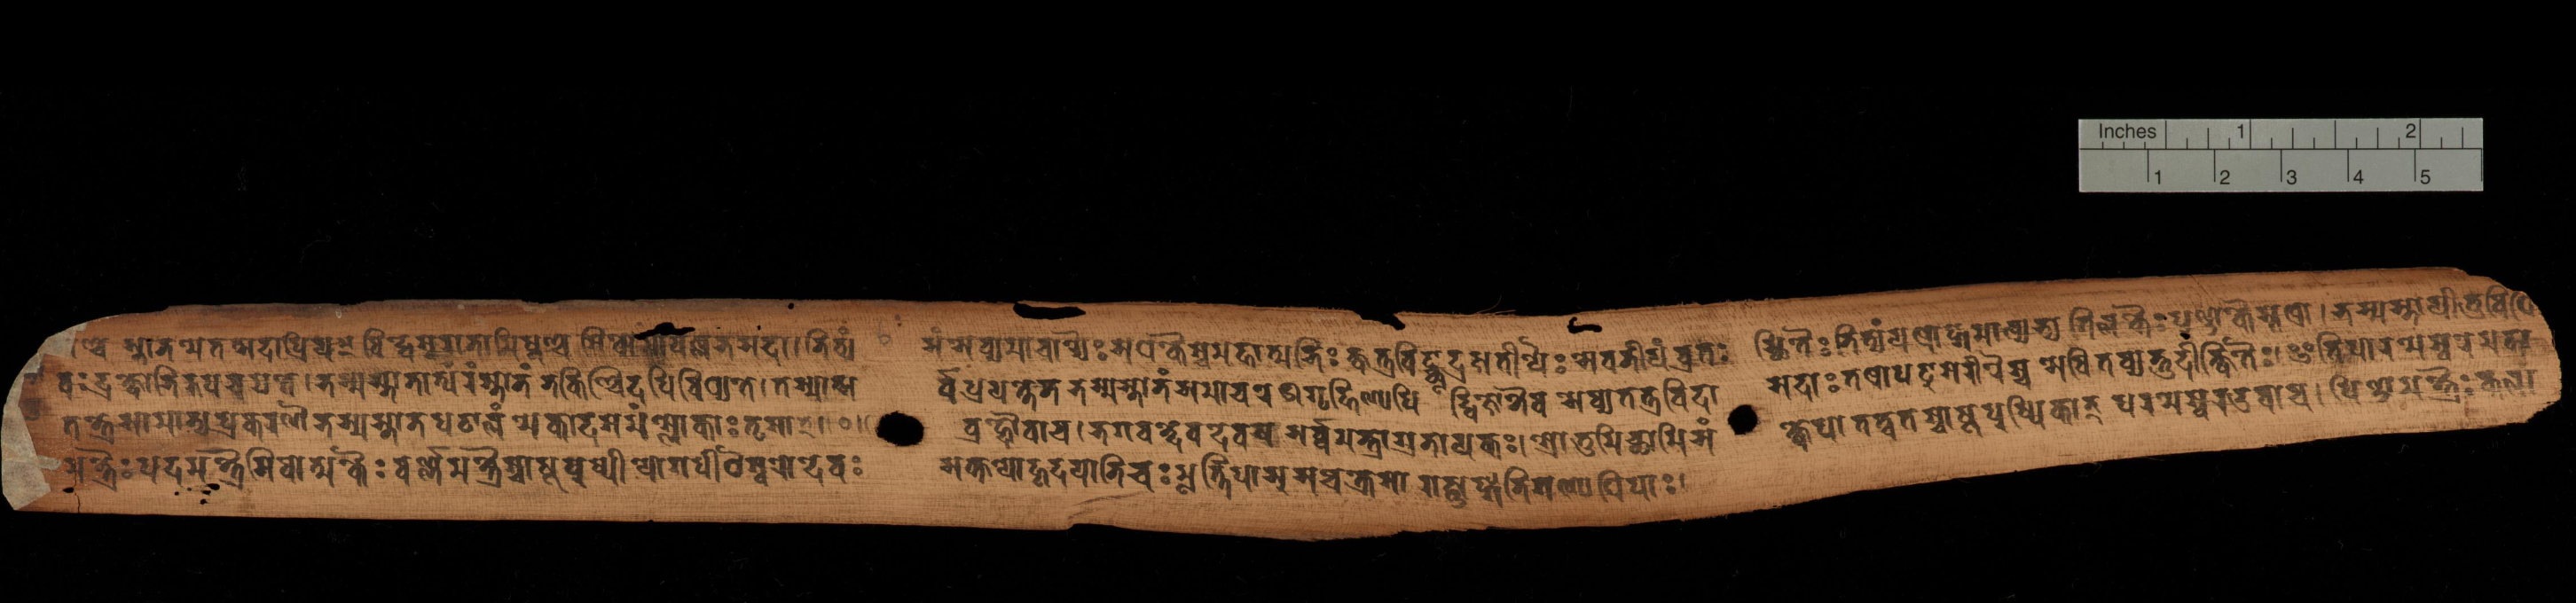 Pārameśvaratantra Cambridge University Library MS Add.1049.1. f. 12 of 124. "One of the oldest known dated Sanskrit manuscripts from South Asia, this specimen transmits a substantial portion of the Pārameśvaratantra, a scripture of the Śaiva Siddhānta, one of the Tantric theological schools that taught the worship of Śiva as "Supreme Lord" (the literal meaning of Parameśvara). No other manuscript of this work is known, but nine chapters are transmitted in the Prāyaścittasamuccaya of Hṛdayaśiva (see Add. 2833), where the work is referred to as the Puskaratantra or Puṣkara-Pārameśvaratantra (see Goodall 1998, particularly p. xliii). According to the colophon, it was copied in the year 252, which some scholars judge to be of the era established by the Nepalese king Aṃśuvarman (also known as Mānadeva), therefore corresponding to 828 CE."